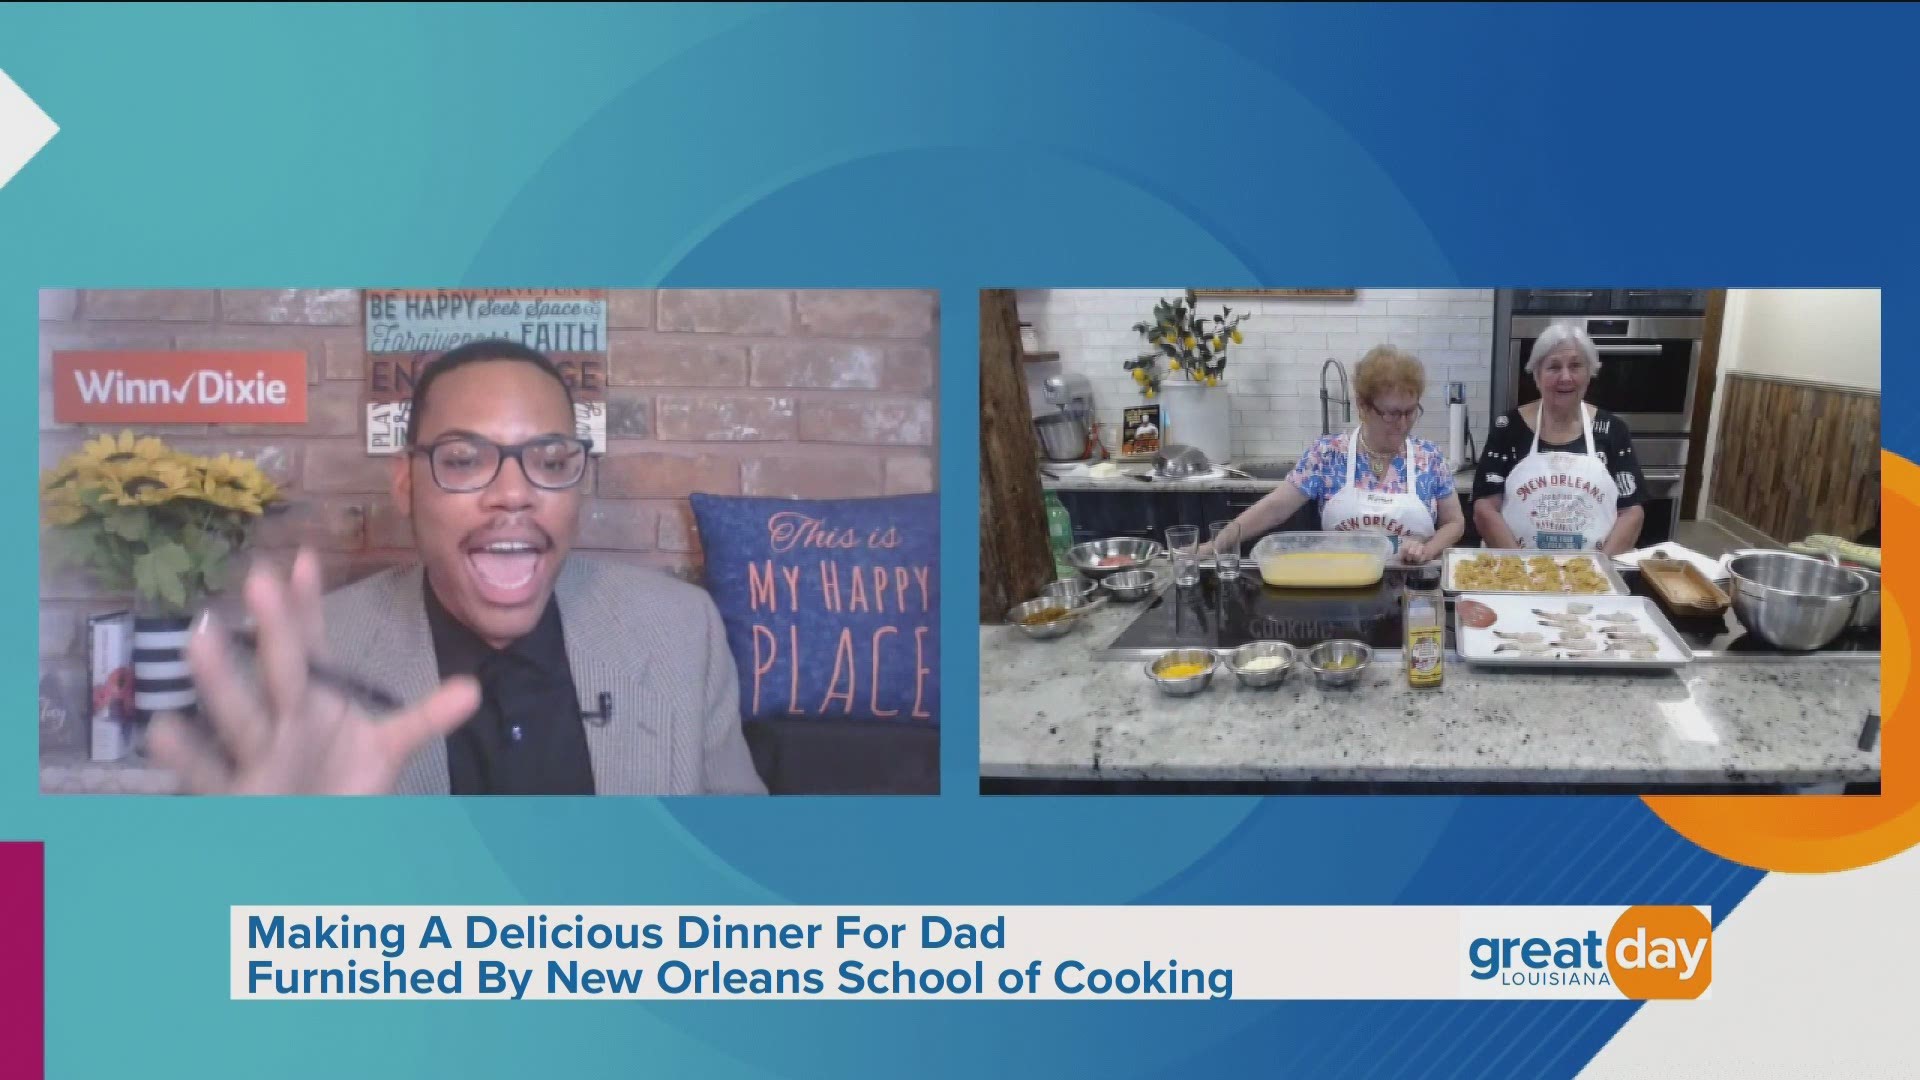 Anne and Harriet from the New Orleans School of Cooking shared an appetizer recipe and drink recipe for Father's Day.